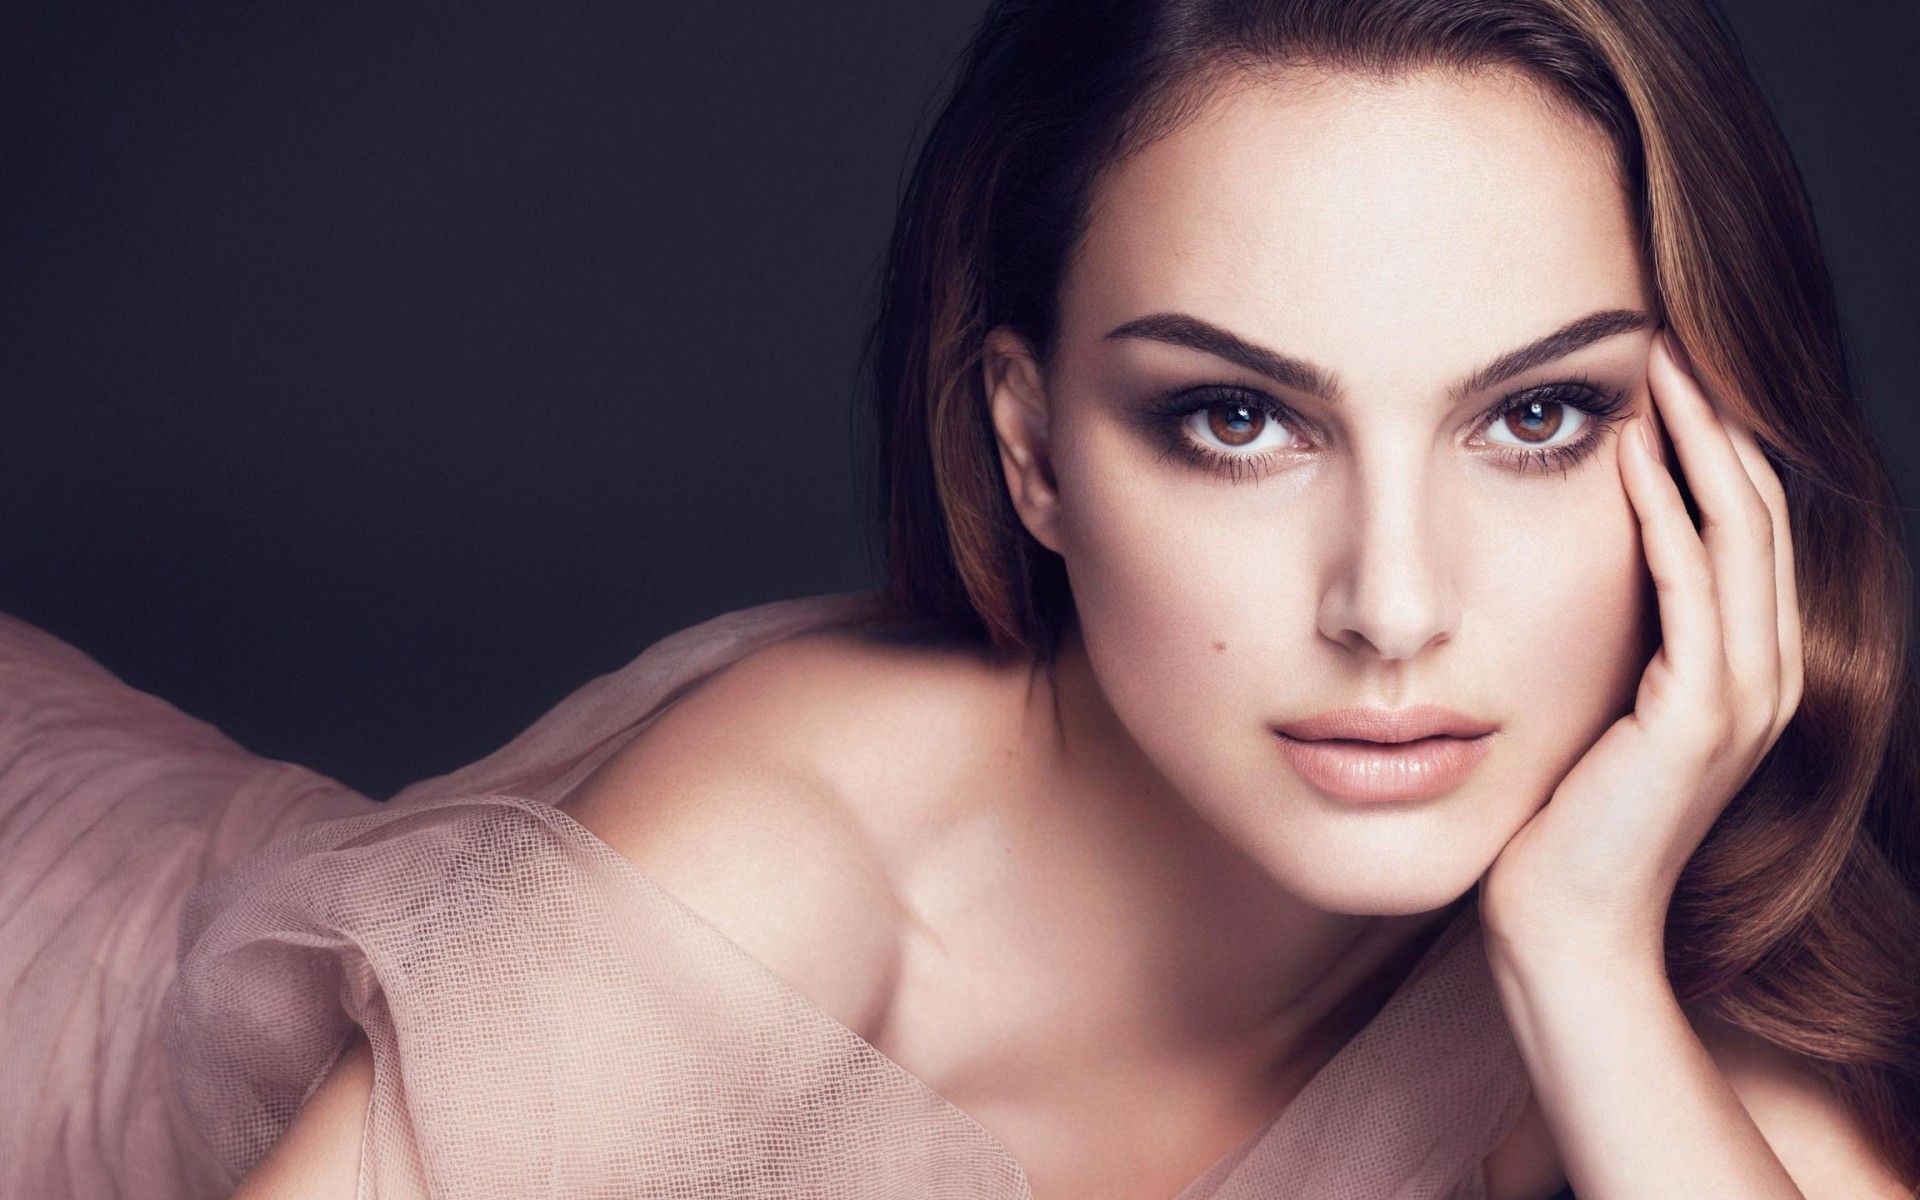 Natalie Portman New HD Wallpaper And Cool And Image